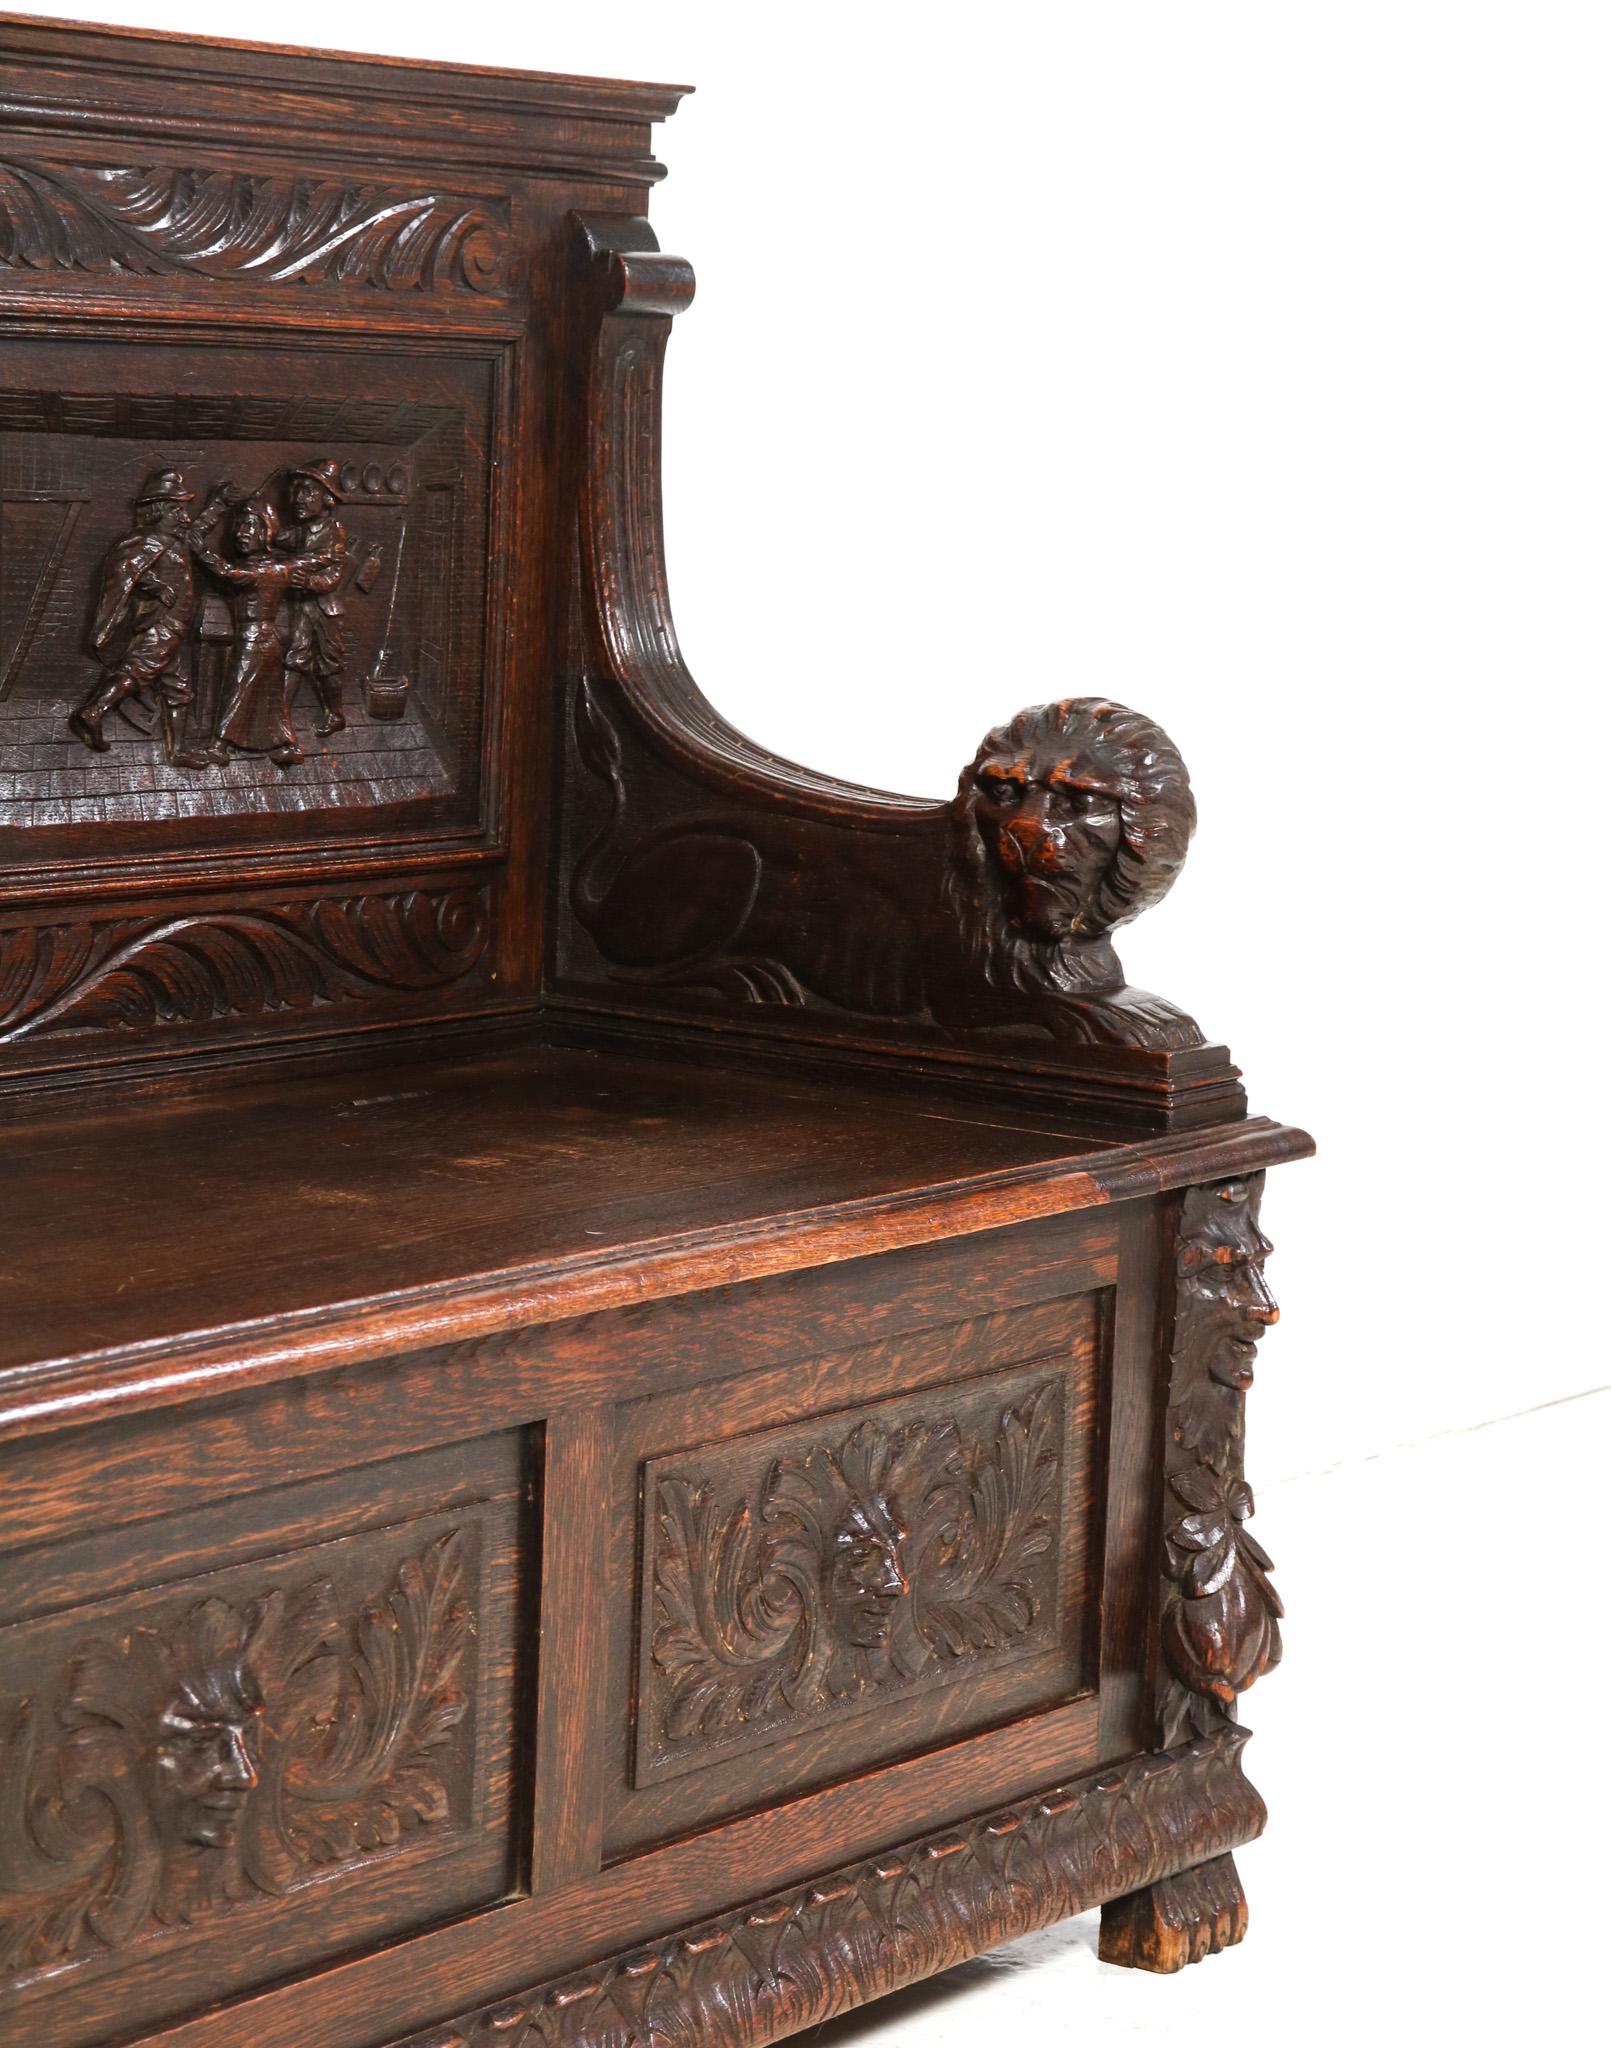 Oak Renaissance Revival Hall Bench with Hand-Carved Lions, 1890s For Sale 1